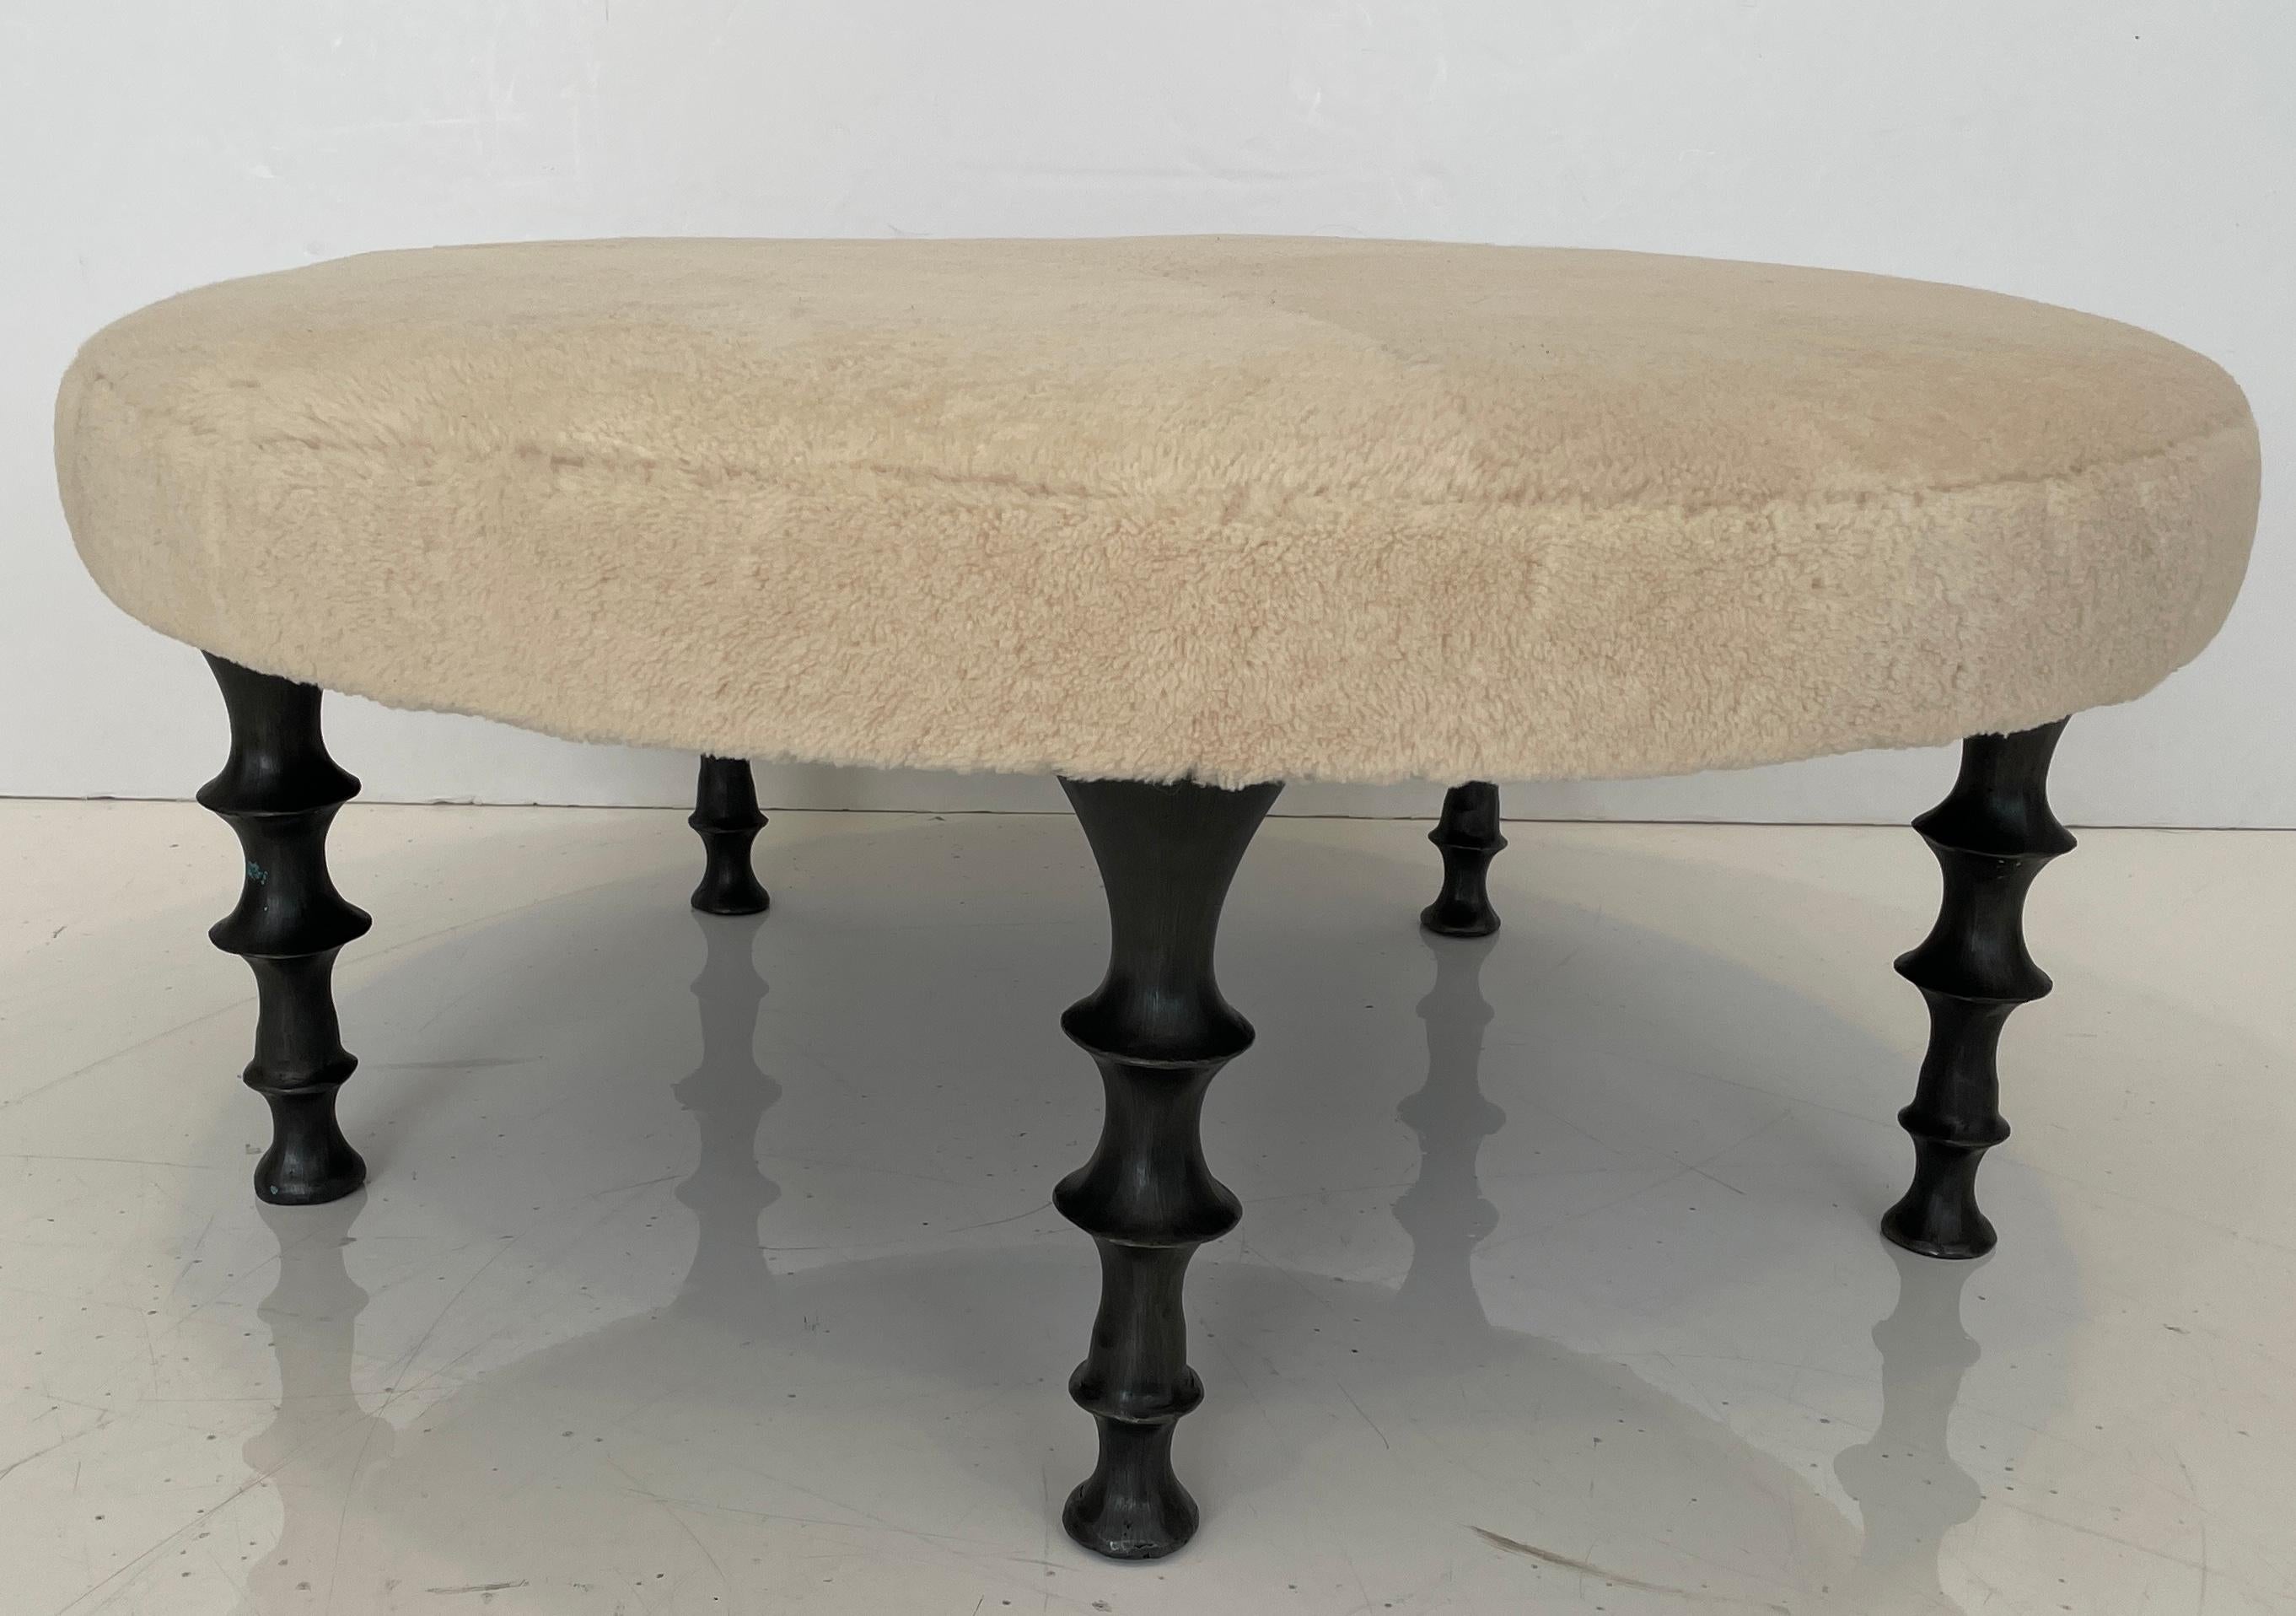 This round ottoman make a dramatic statement in your interior. It has five powerful cast silicon bronze legs, shearling hide with an organic feel. The cushion can be made is various shapes, in your own fabric or hide. We can also create stools or